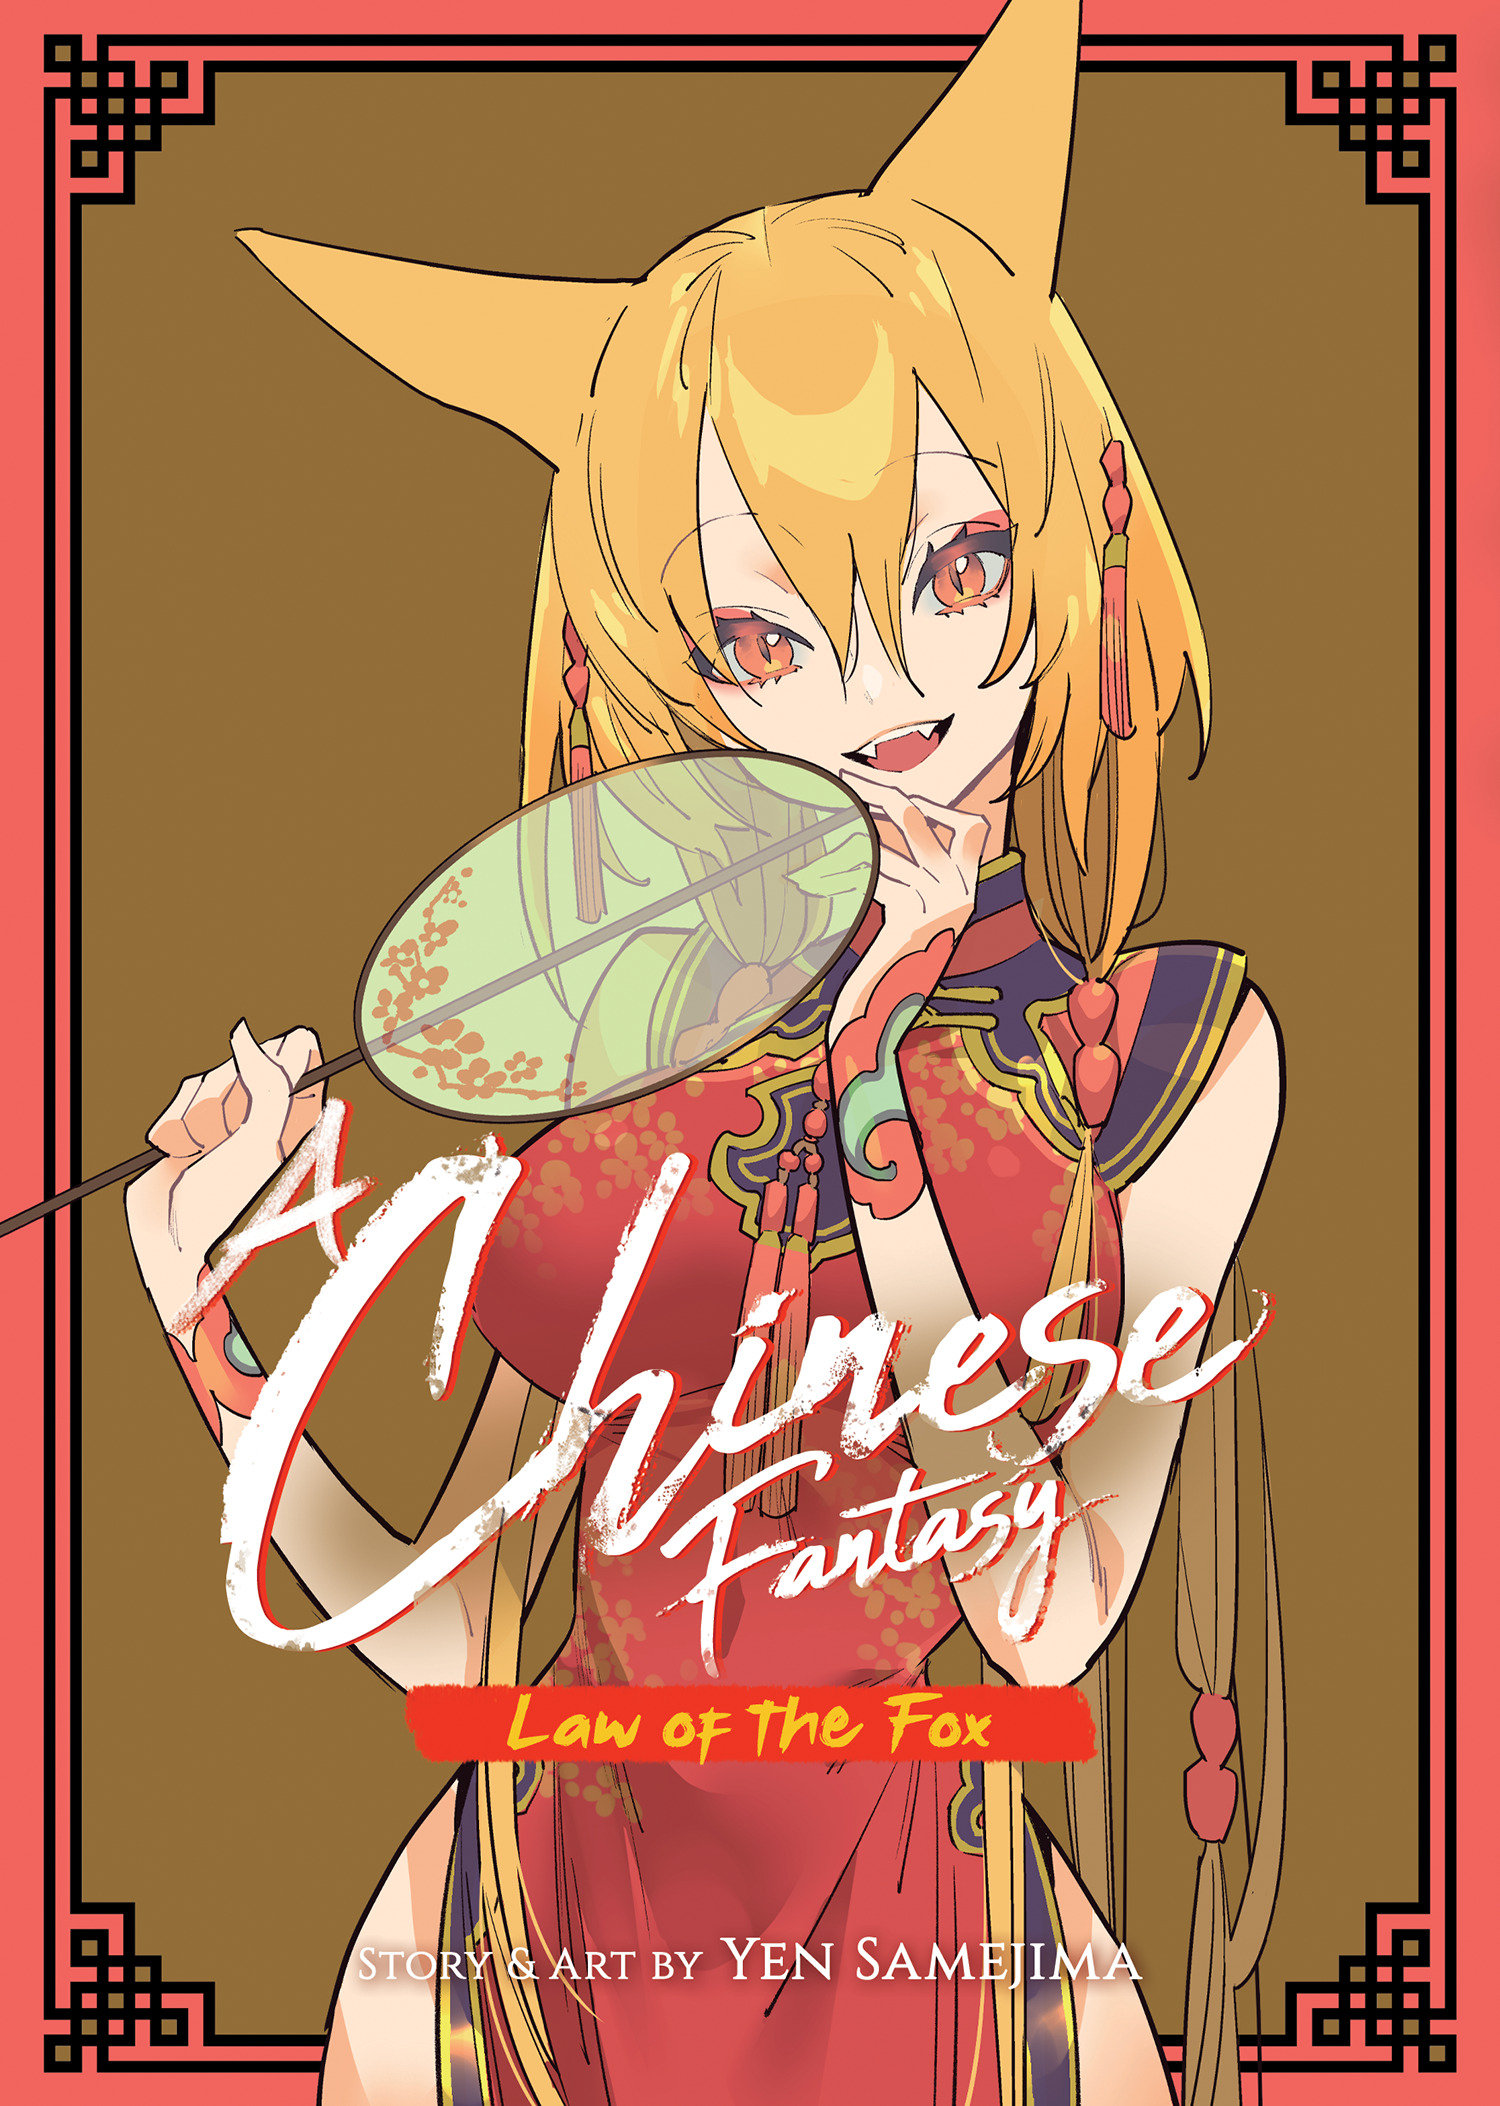 A Chinese Fantasy Book 2 - Law of the Fox